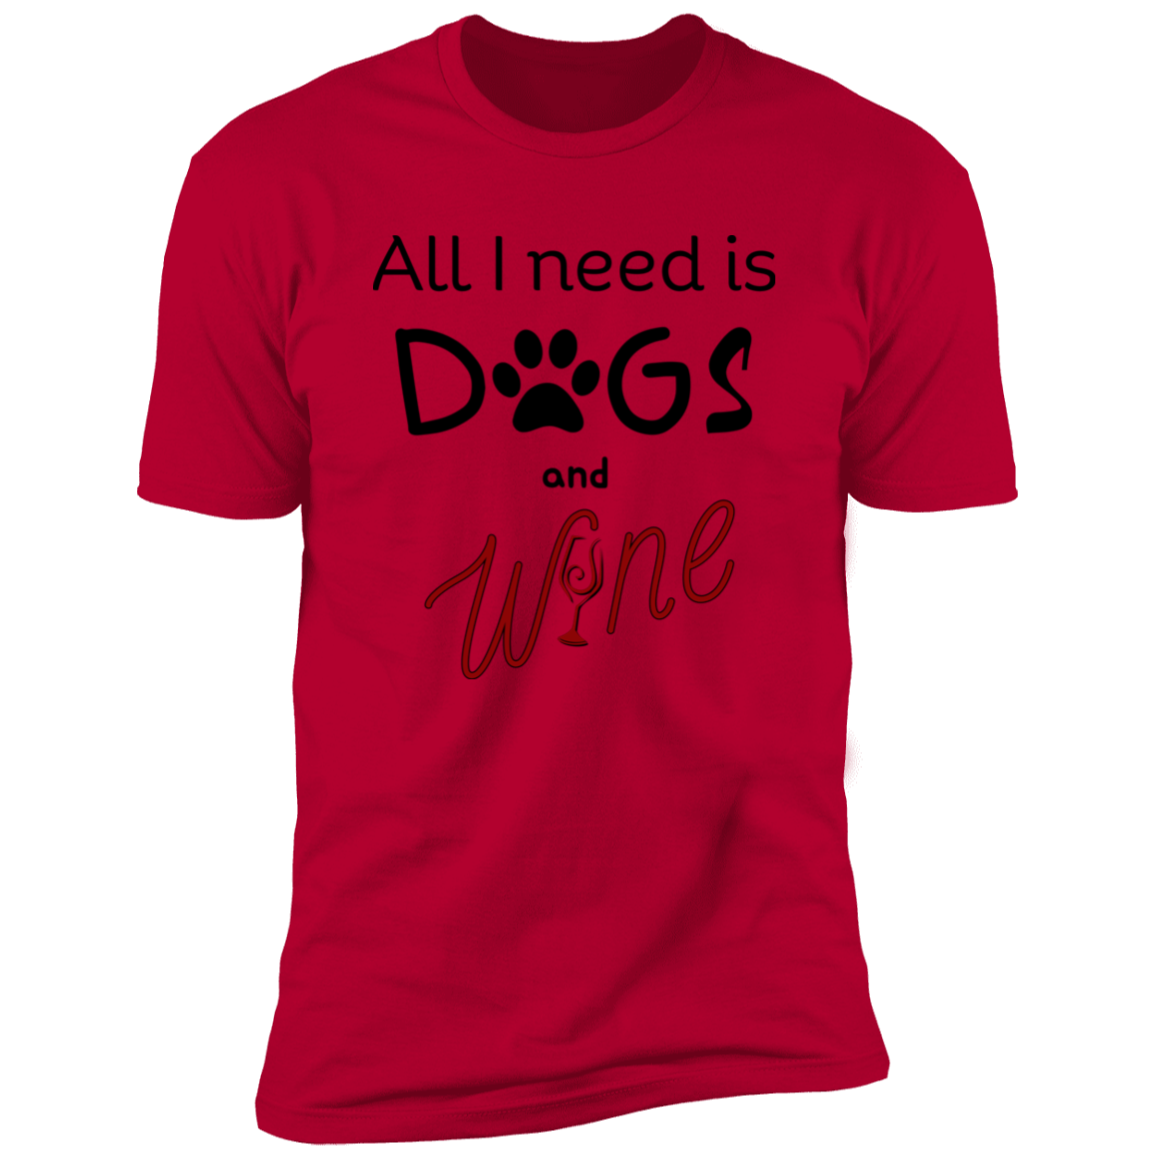 All I Need is Dogs and Wine T-shirt, Dog Shirt for humans, in red